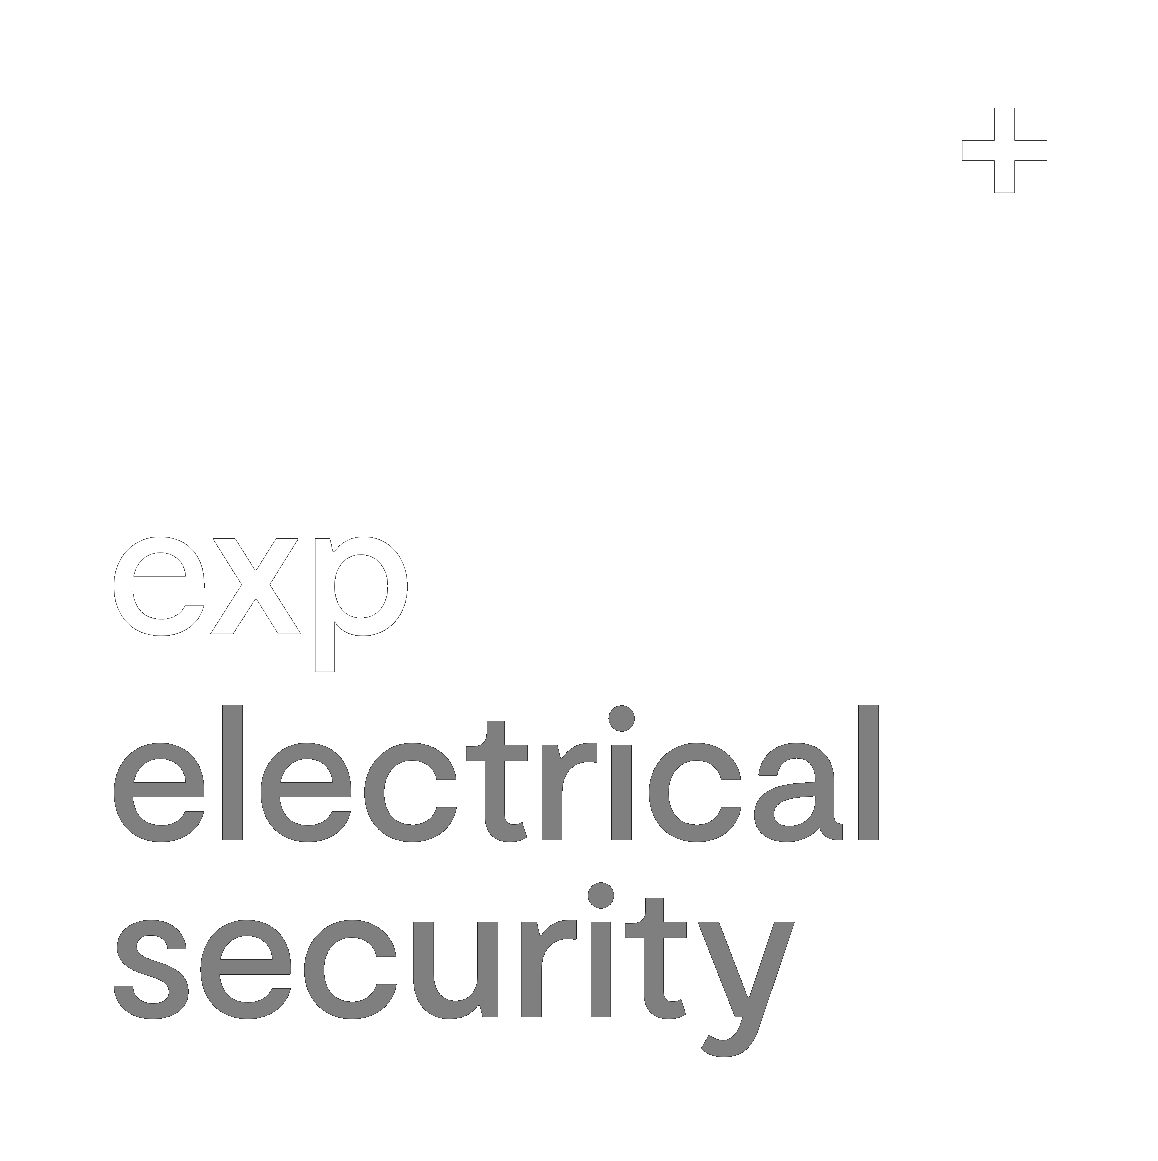 exp electrical + security